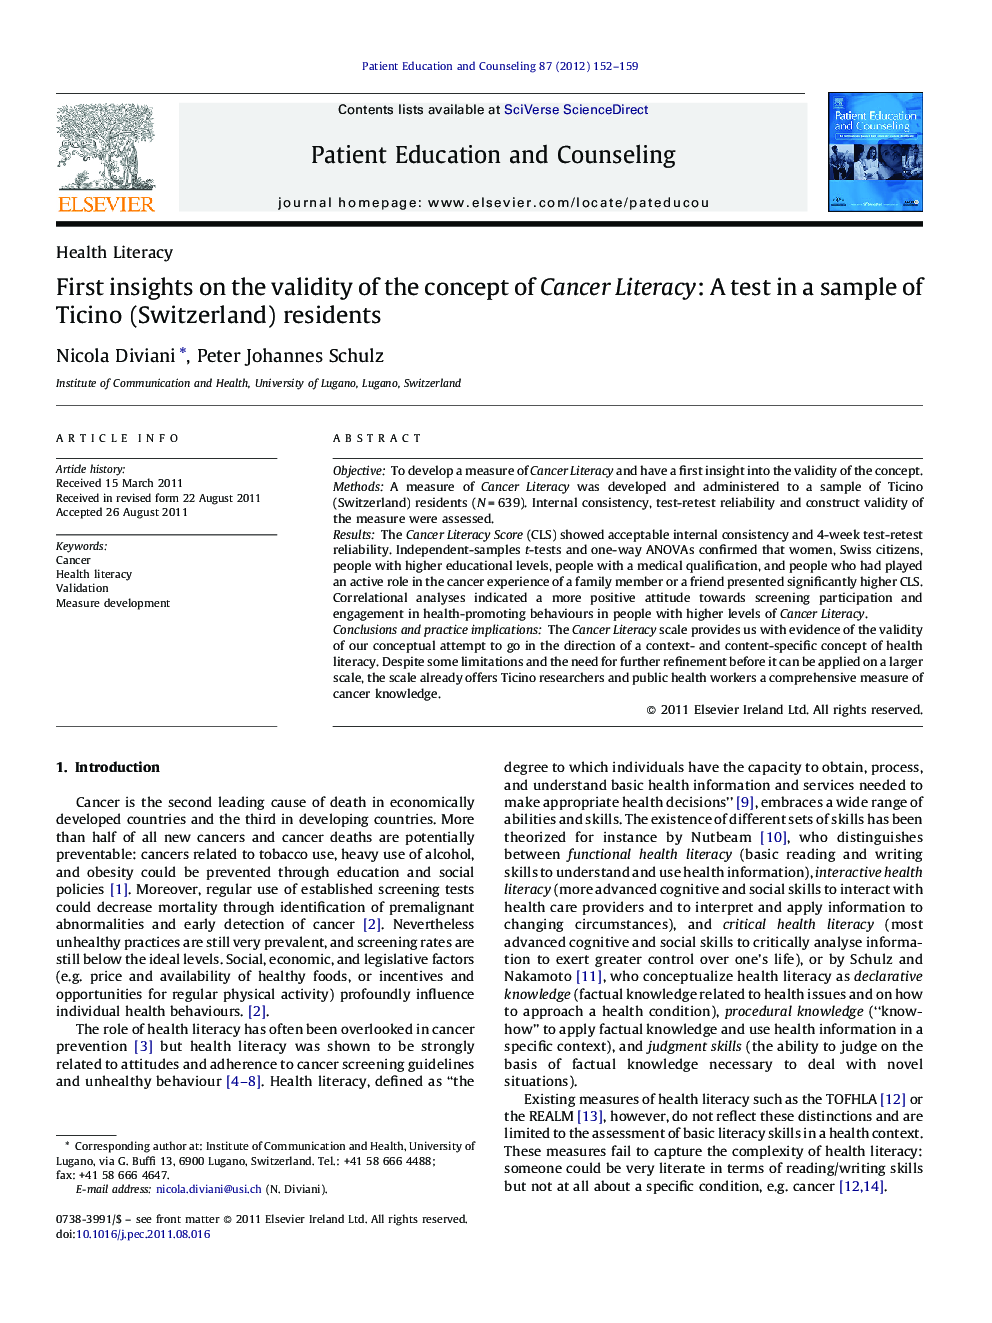 First insights on the validity of the concept of Cancer Literacy: A test in a sample of Ticino (Switzerland) residents